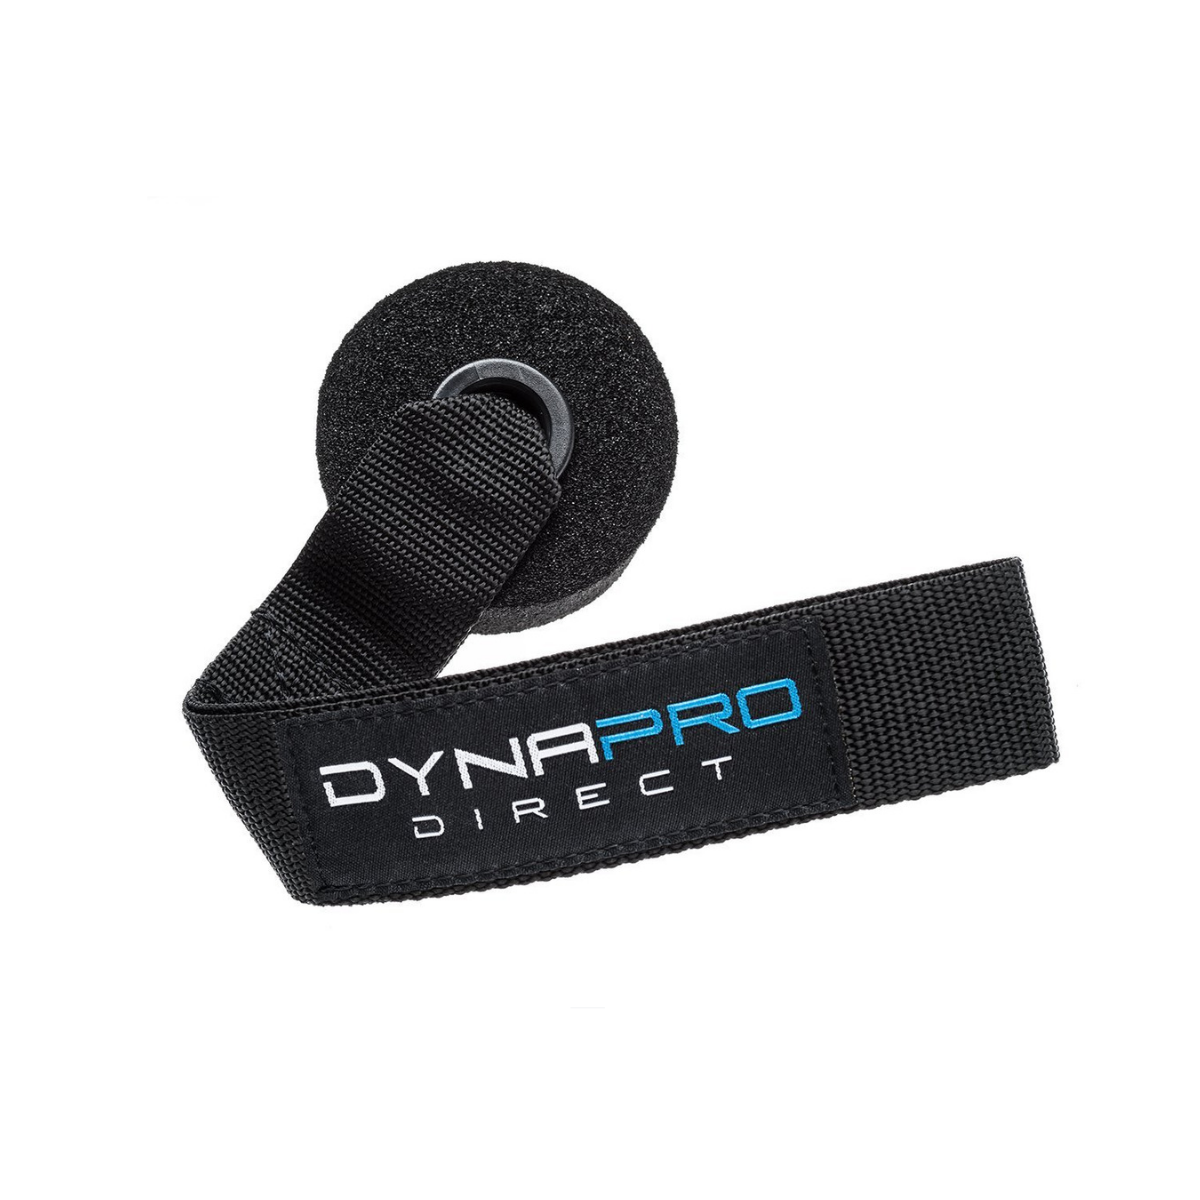 Dynapro door anchor for purchase. Door anchor for resistance bands.